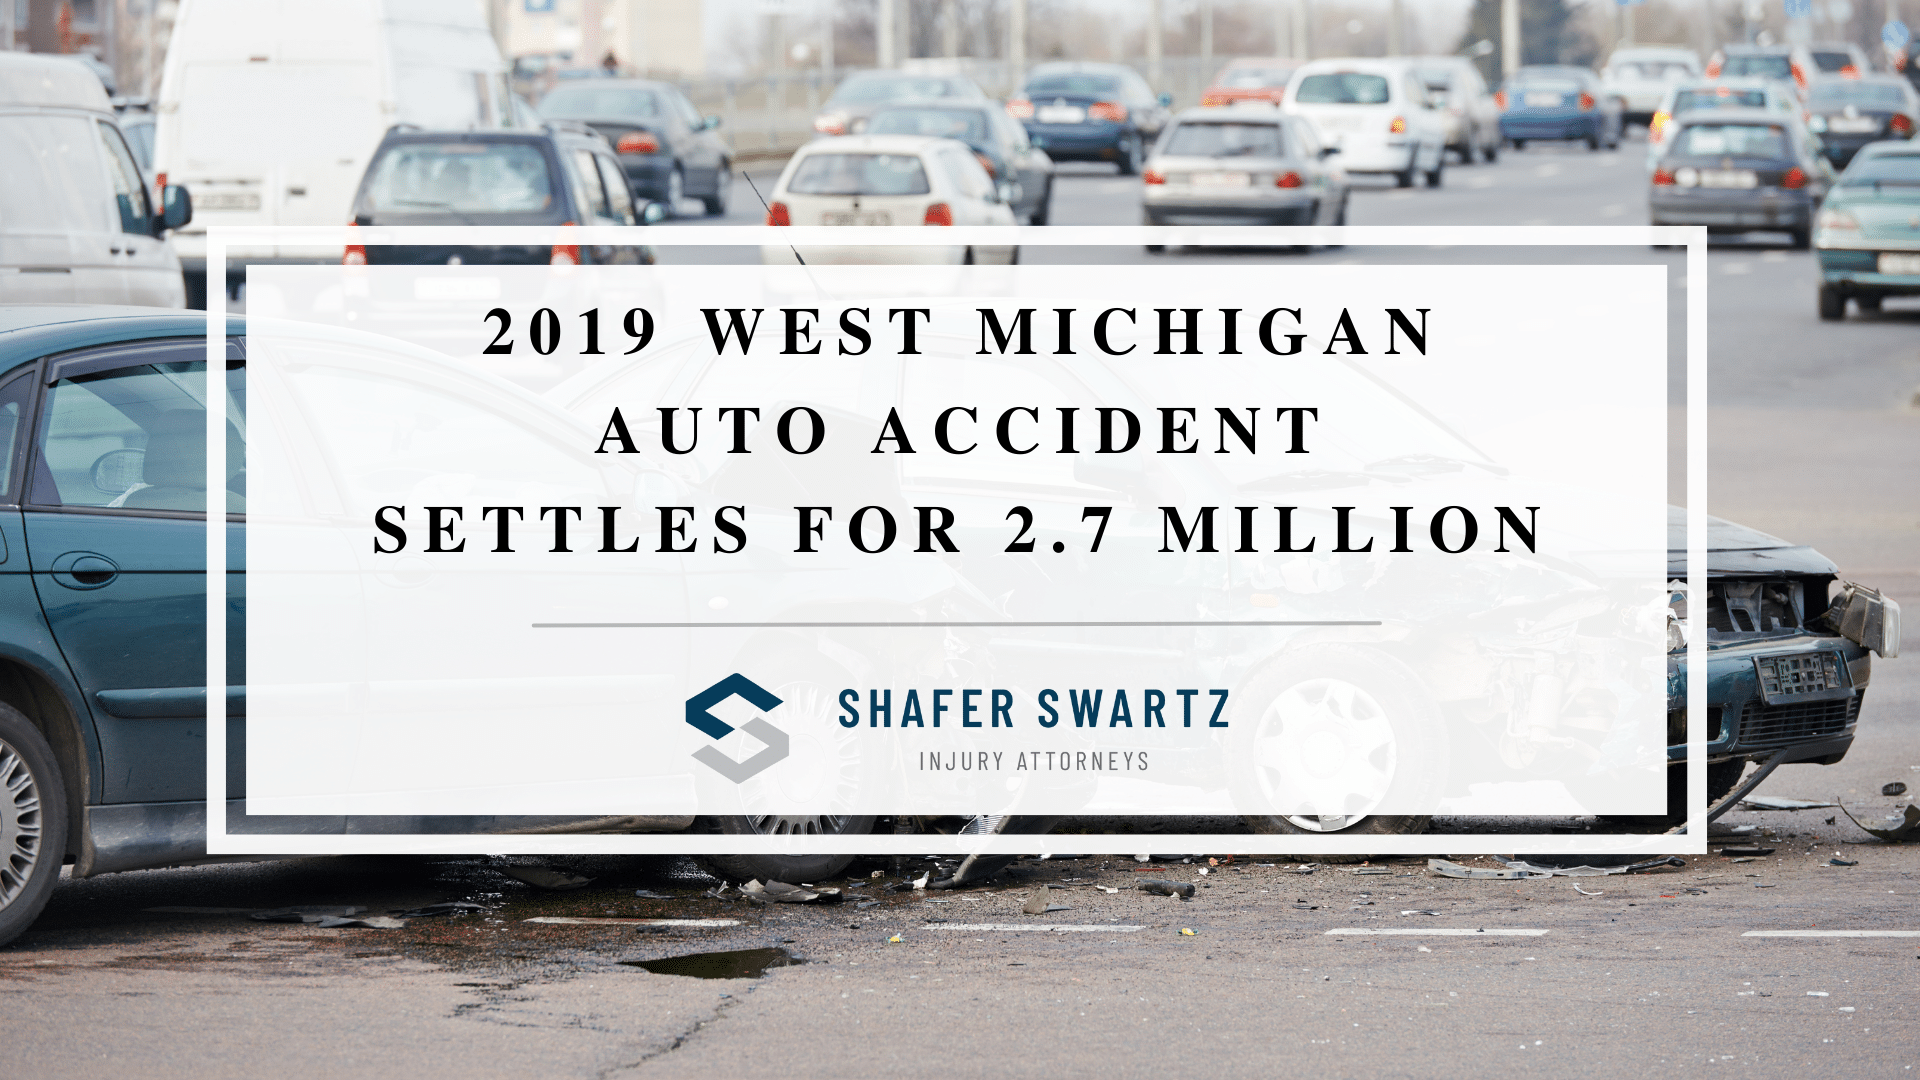 Featured image of 2019 West Michigan<br />
Auto Accident<br />
settles for 2.7 Million